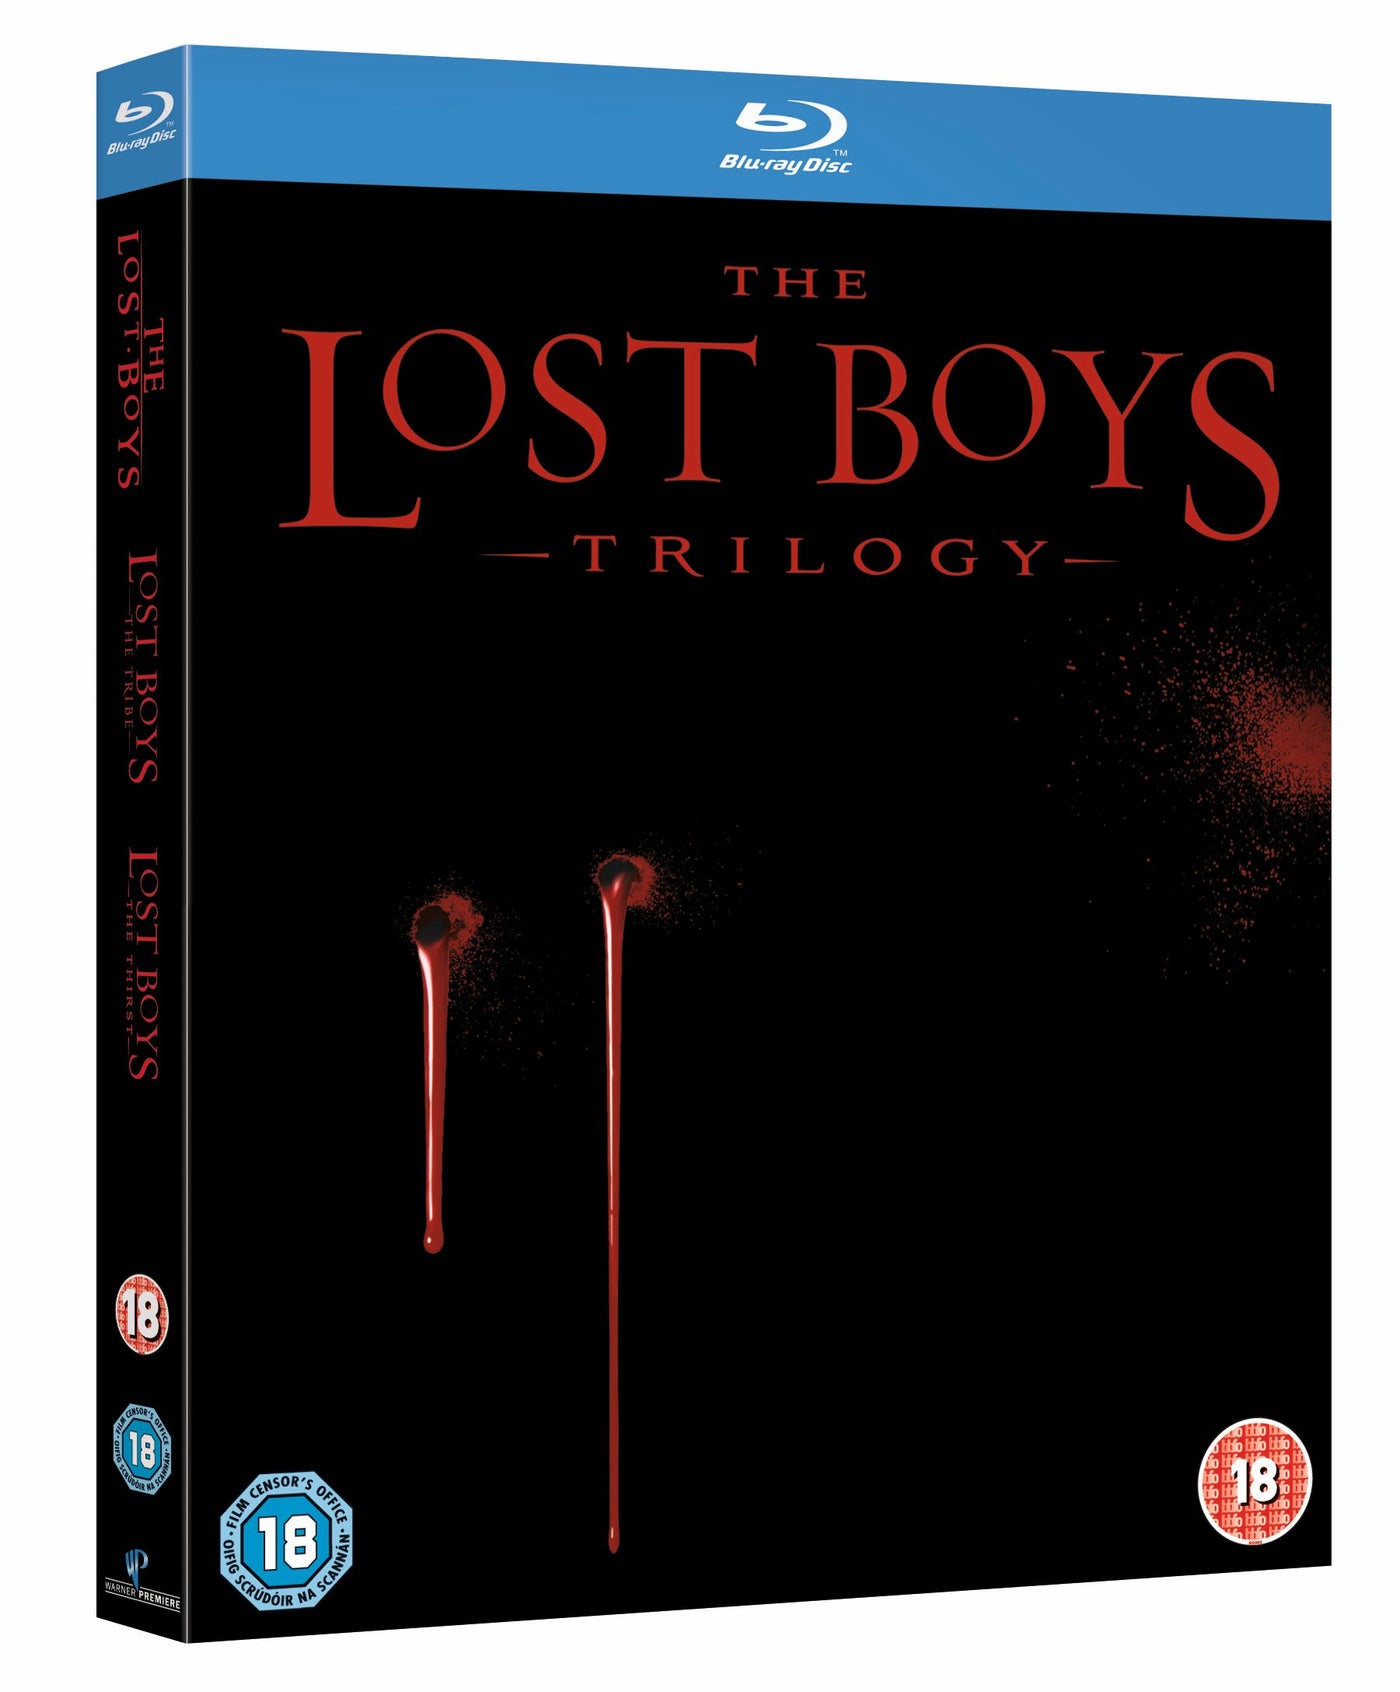 The Lost Boys Trilogy [1987] (Blu-ray)